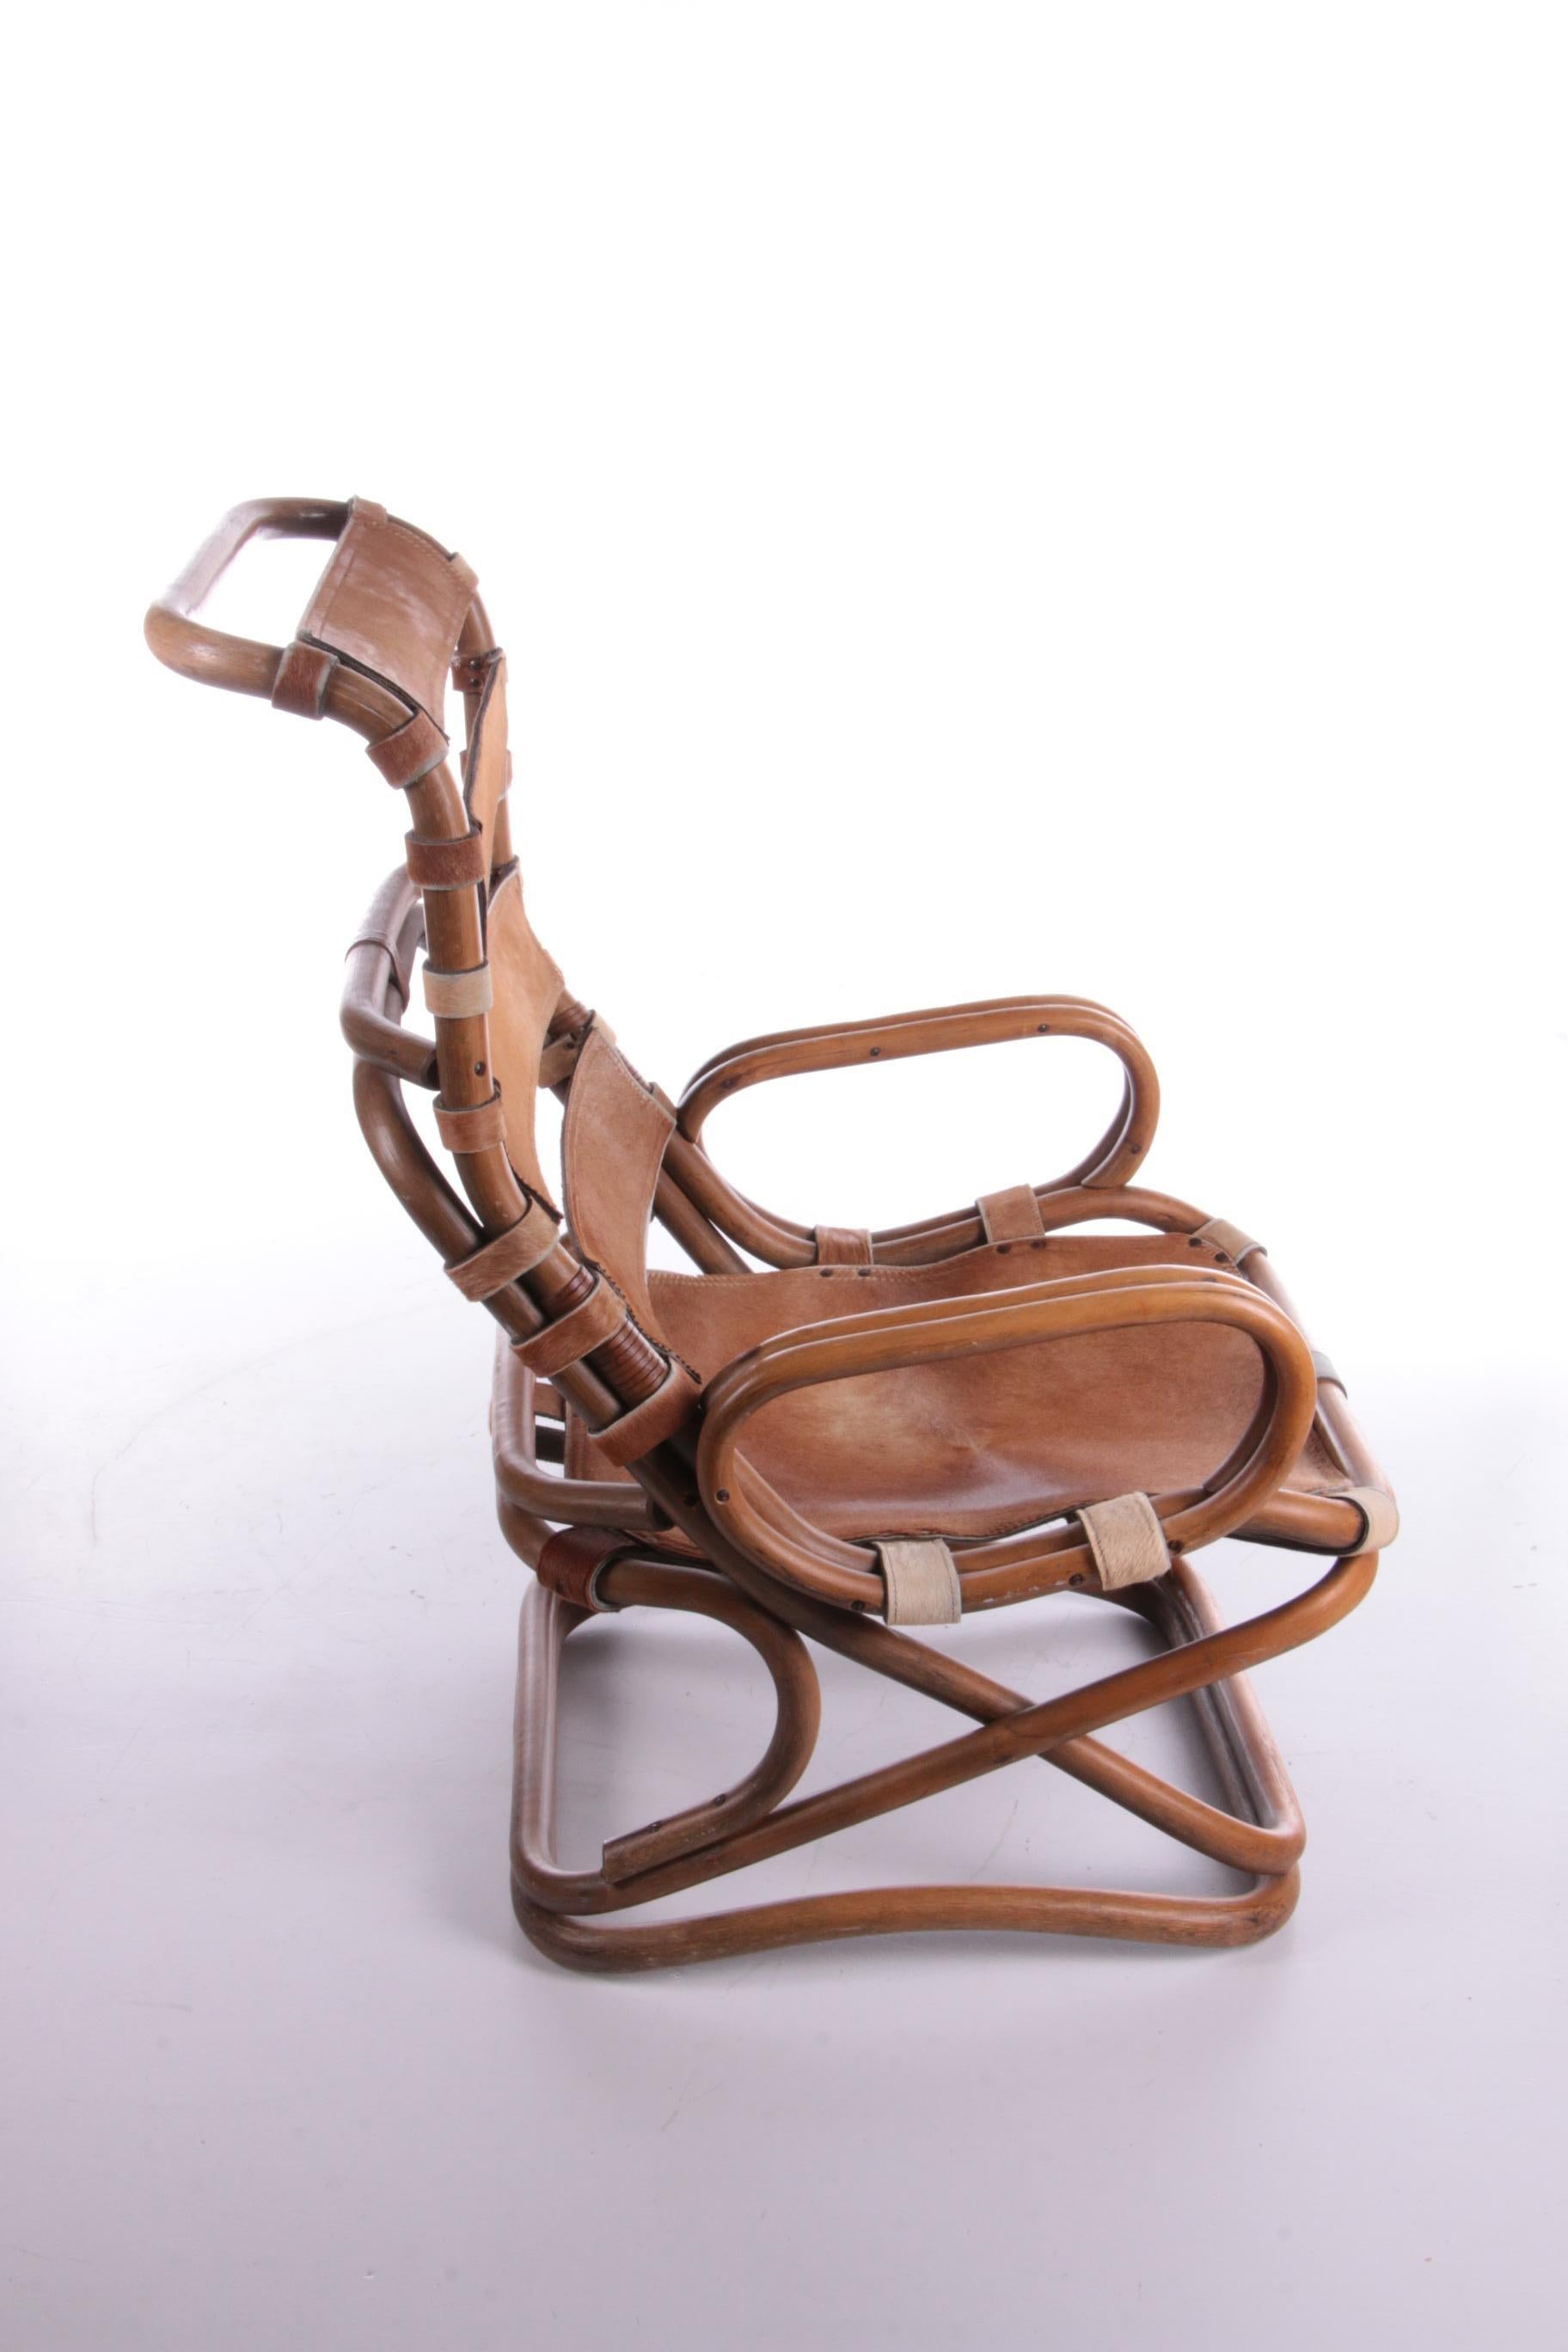 Mid-20th Century Tito Agnoli Relax Chair Made of Bamboo and Leather, 1960 For Sale